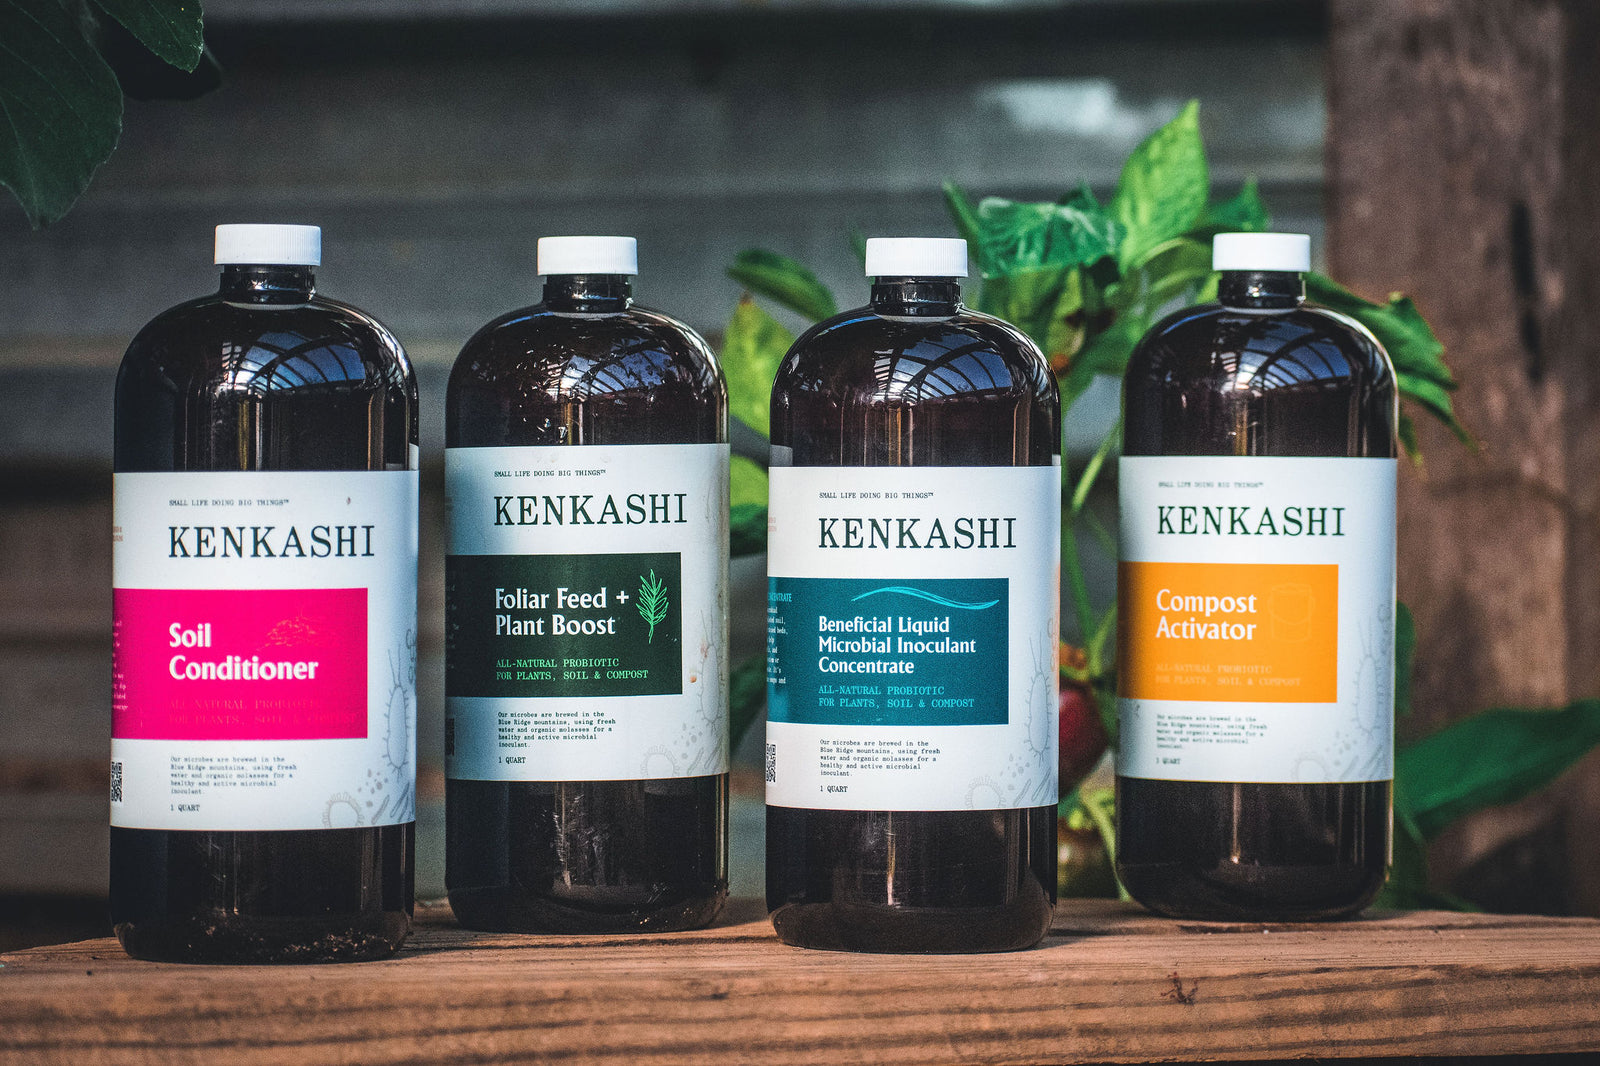 Kenkashi liquid microbial inoculant concentrate bottles on wood ledge with plant in greenhouse